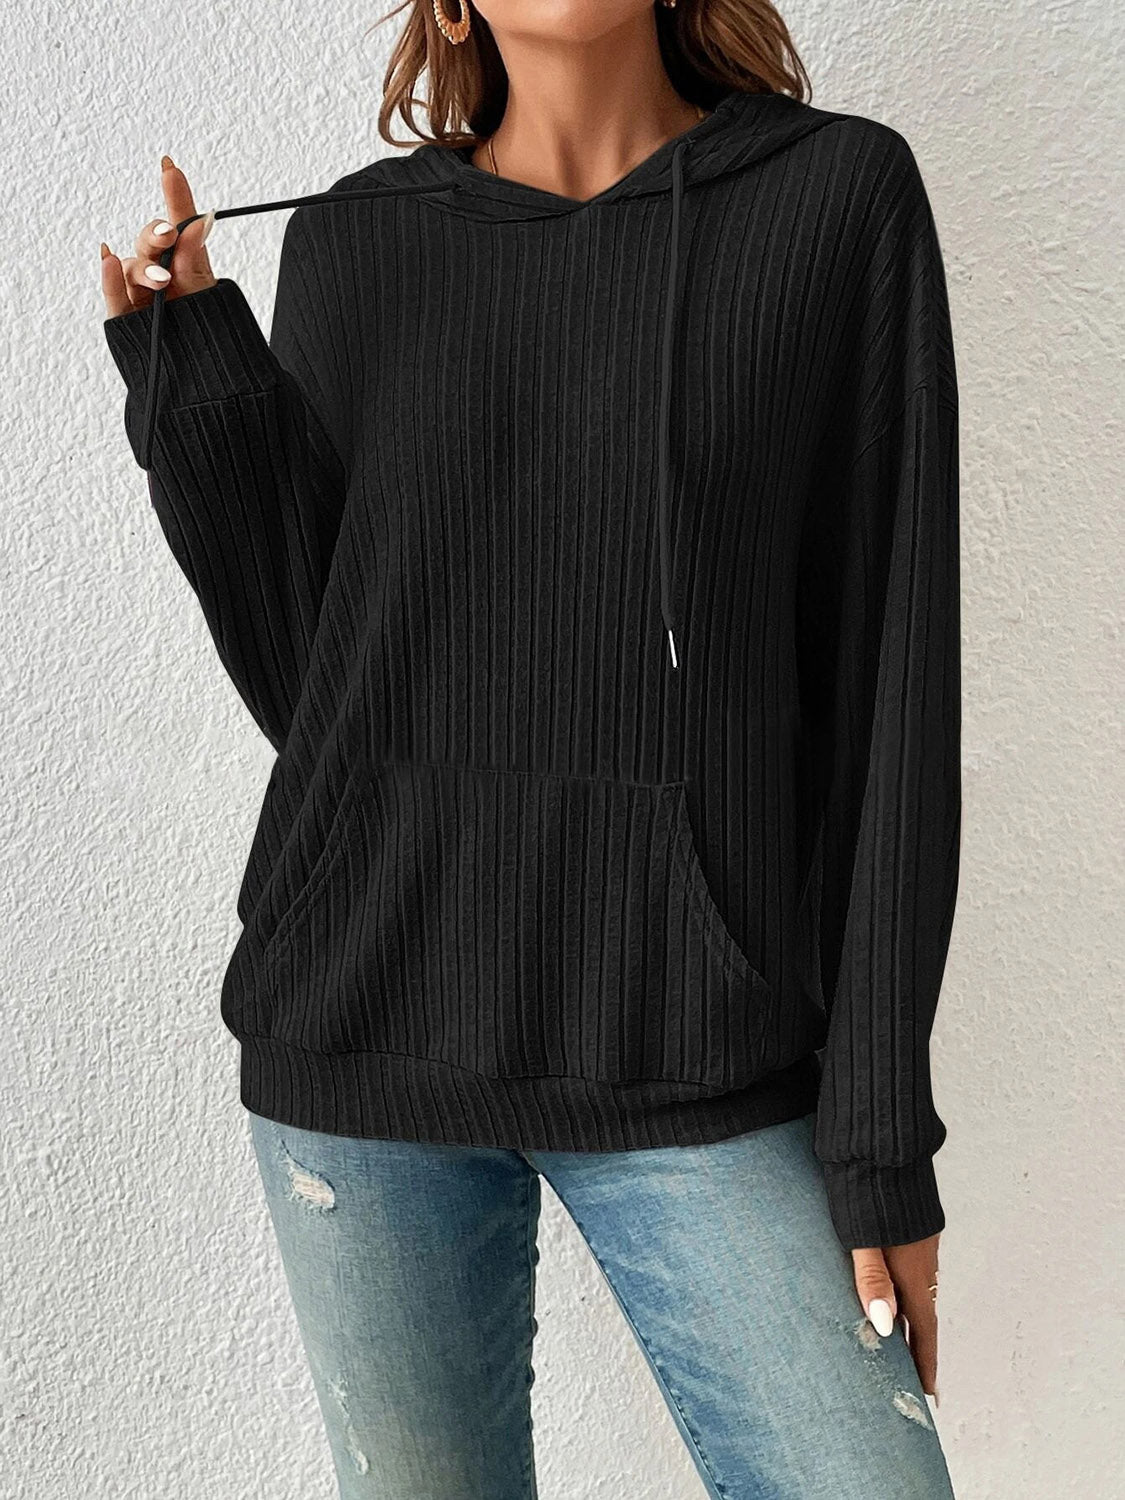 Ribbed Dropped Shoulder Drawstring Hoodie - Black / S - Women’s Clothing & Accessories - Shirts & Tops - 14 - 2024